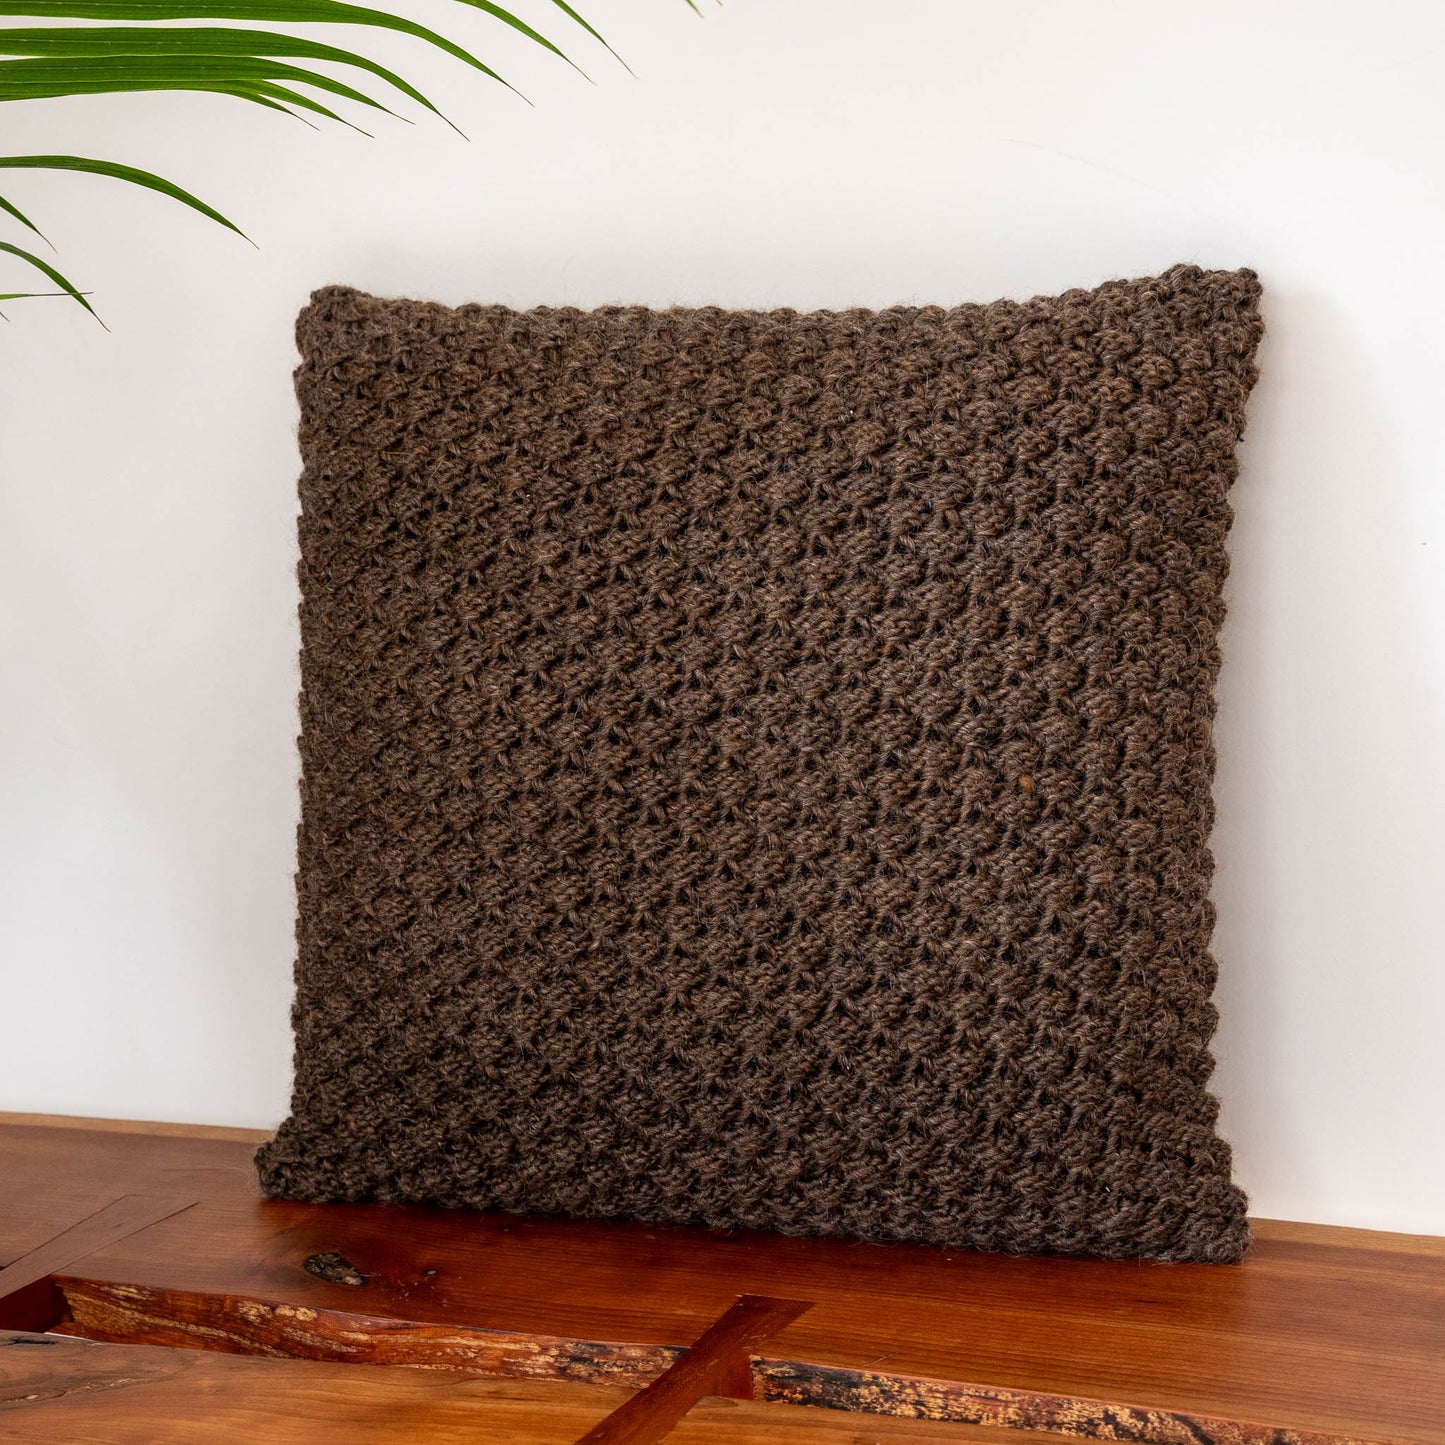 Knitted Wool Throw Pillow Cover | Sable